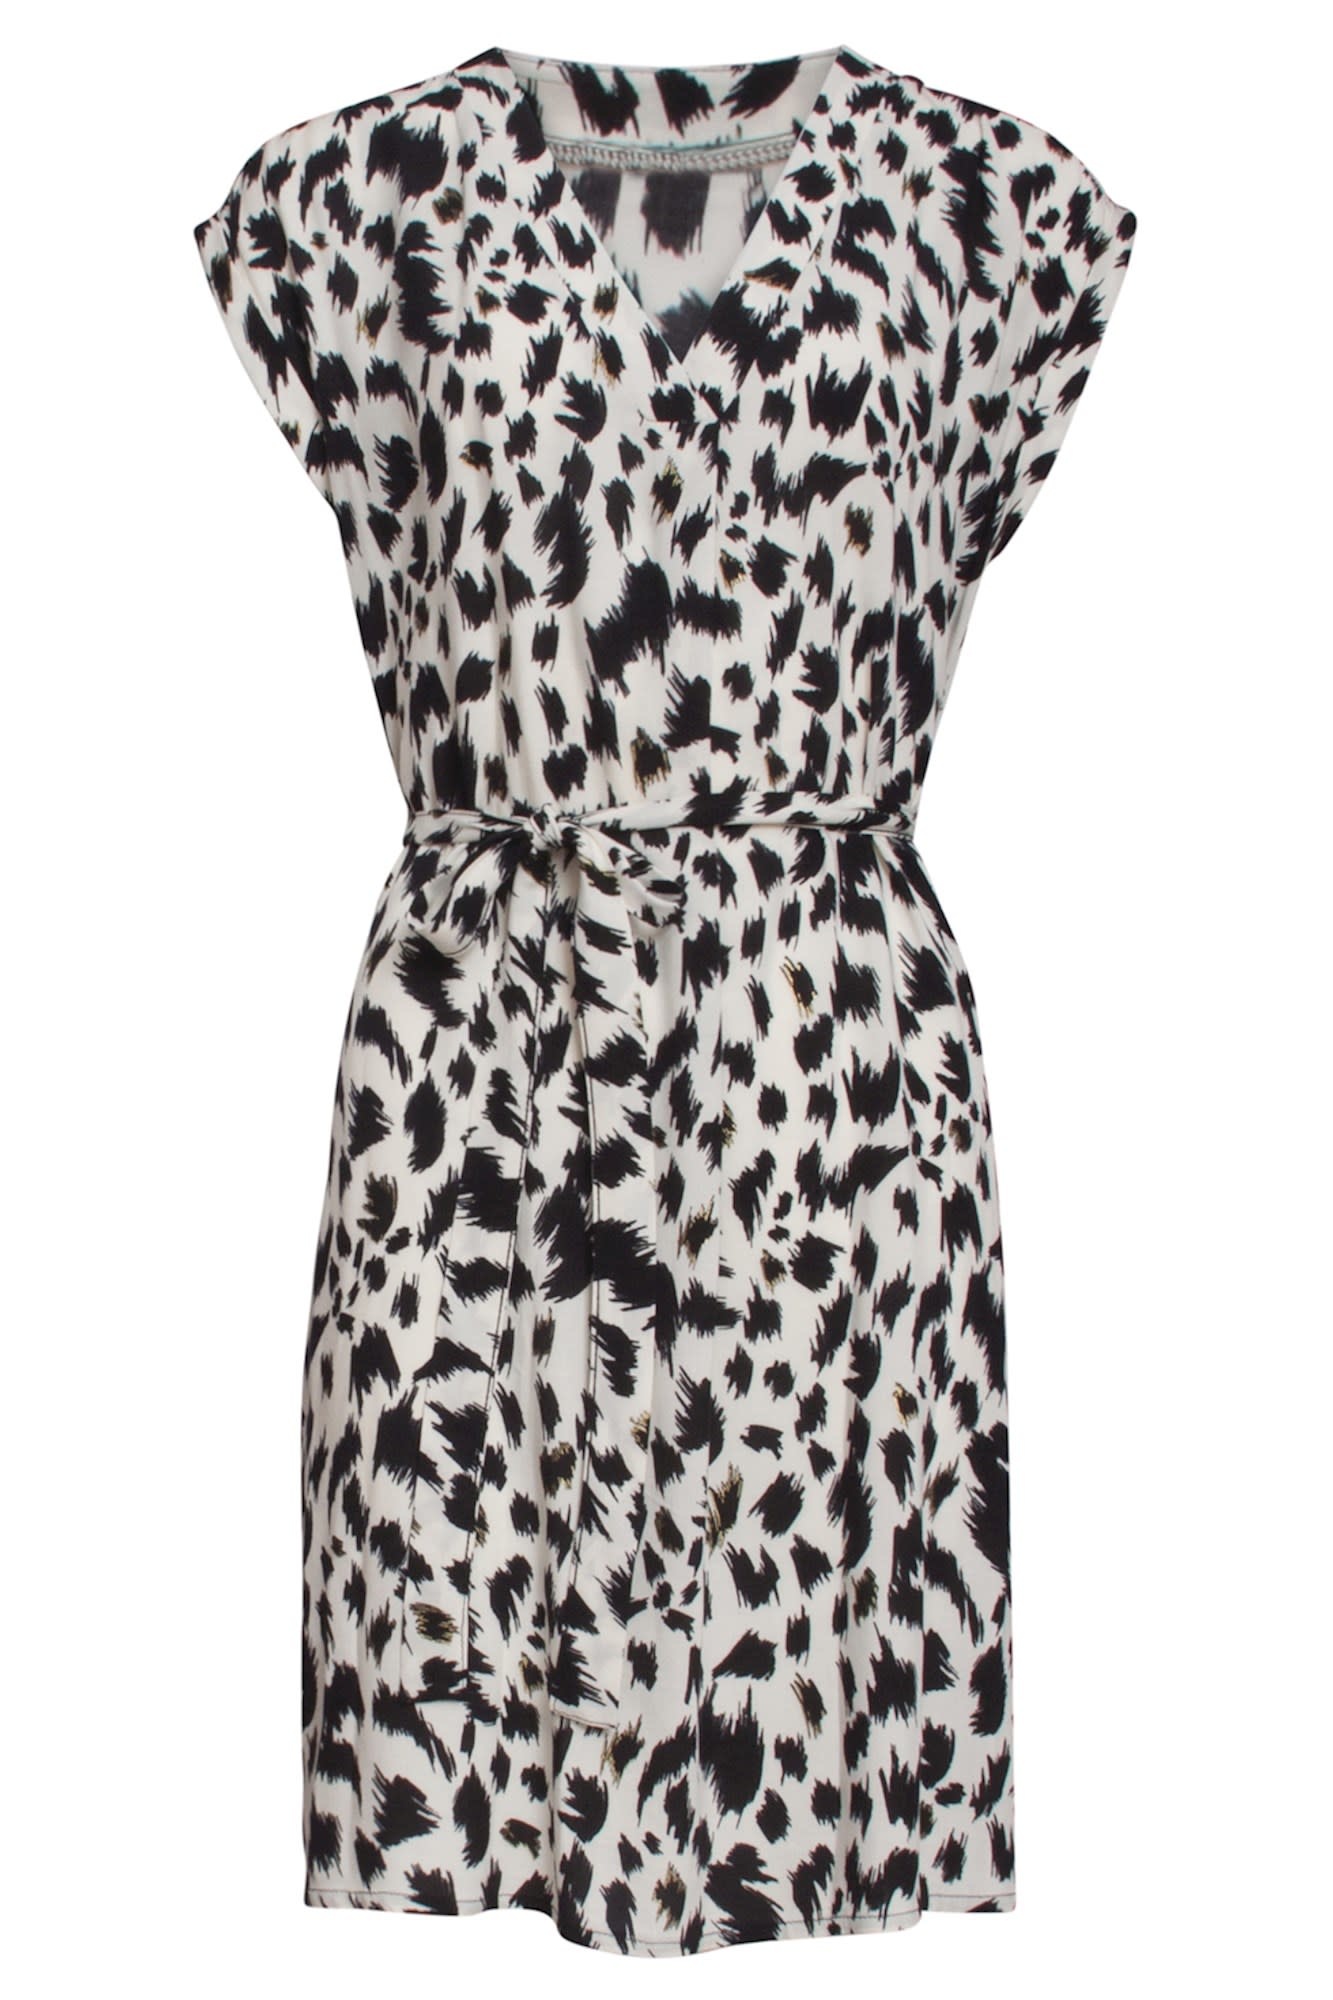 Offwhite and Black Speckle Print Dress